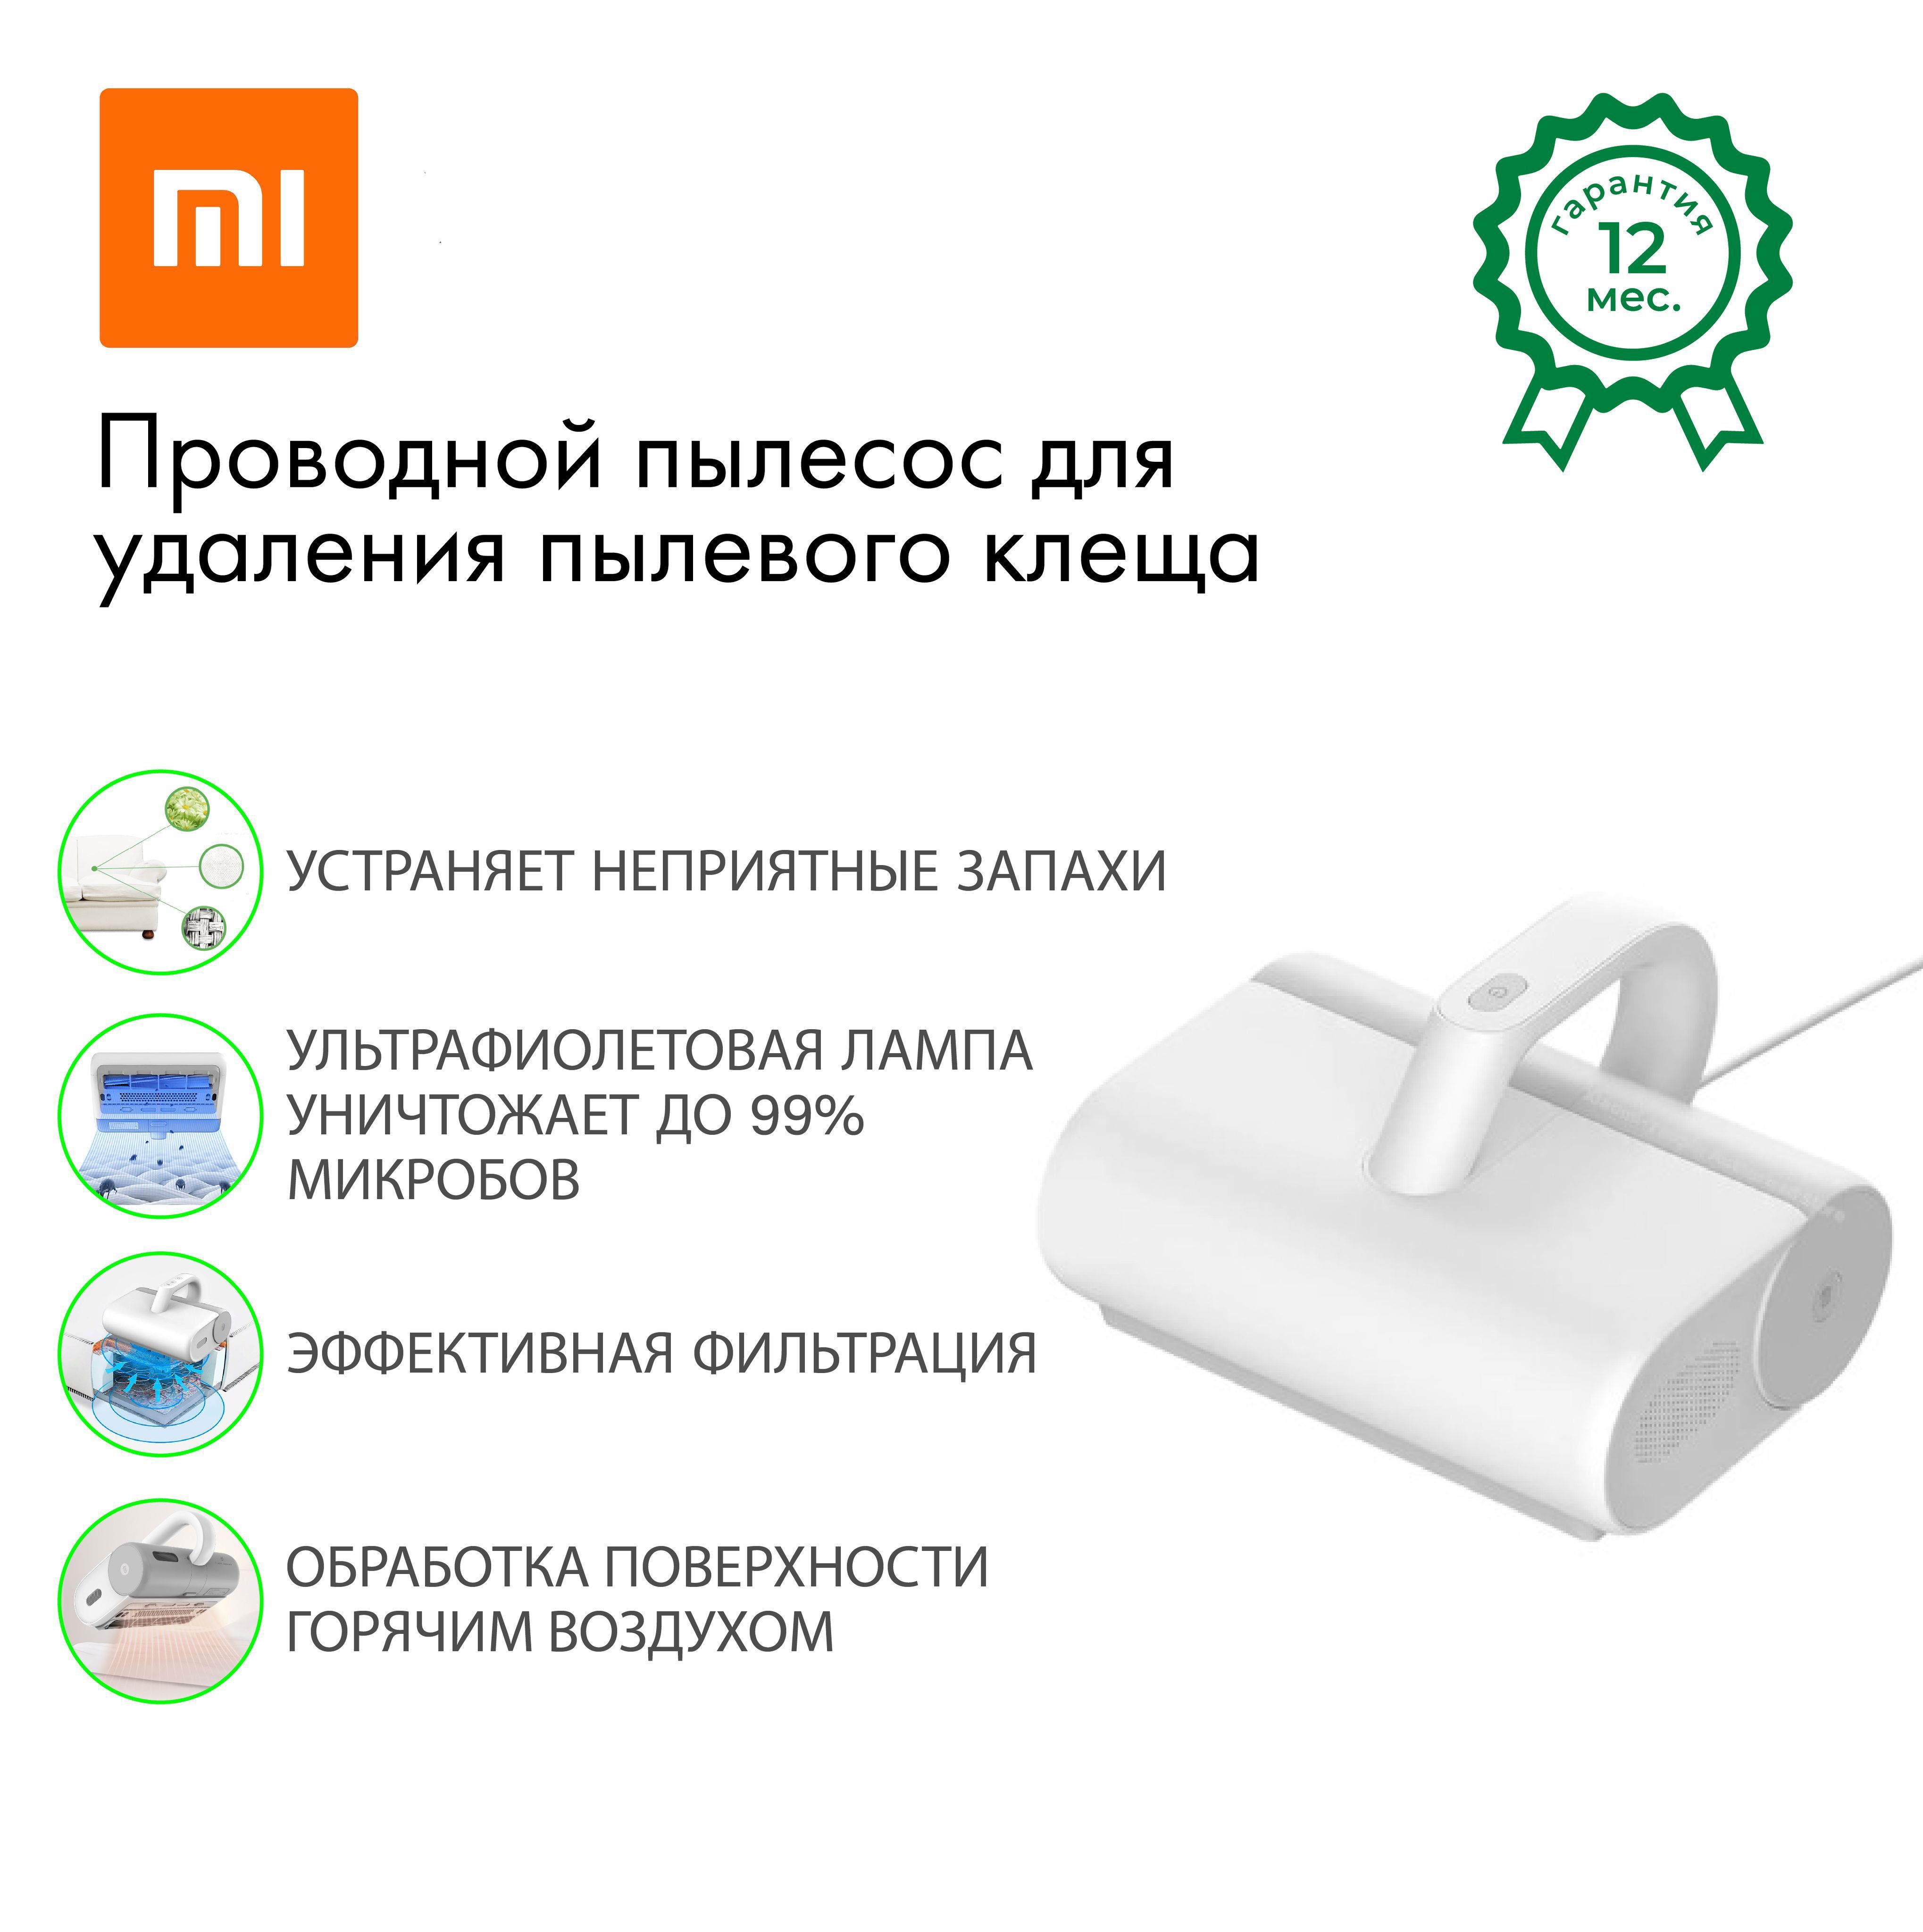 Cleaner mjcmy01dy. Xiaomi Mijia Dust Mite Vacuum Cleaner. Xiaomi Dust Mite Vacuum Cleaner mjcmy01dy лампочка.